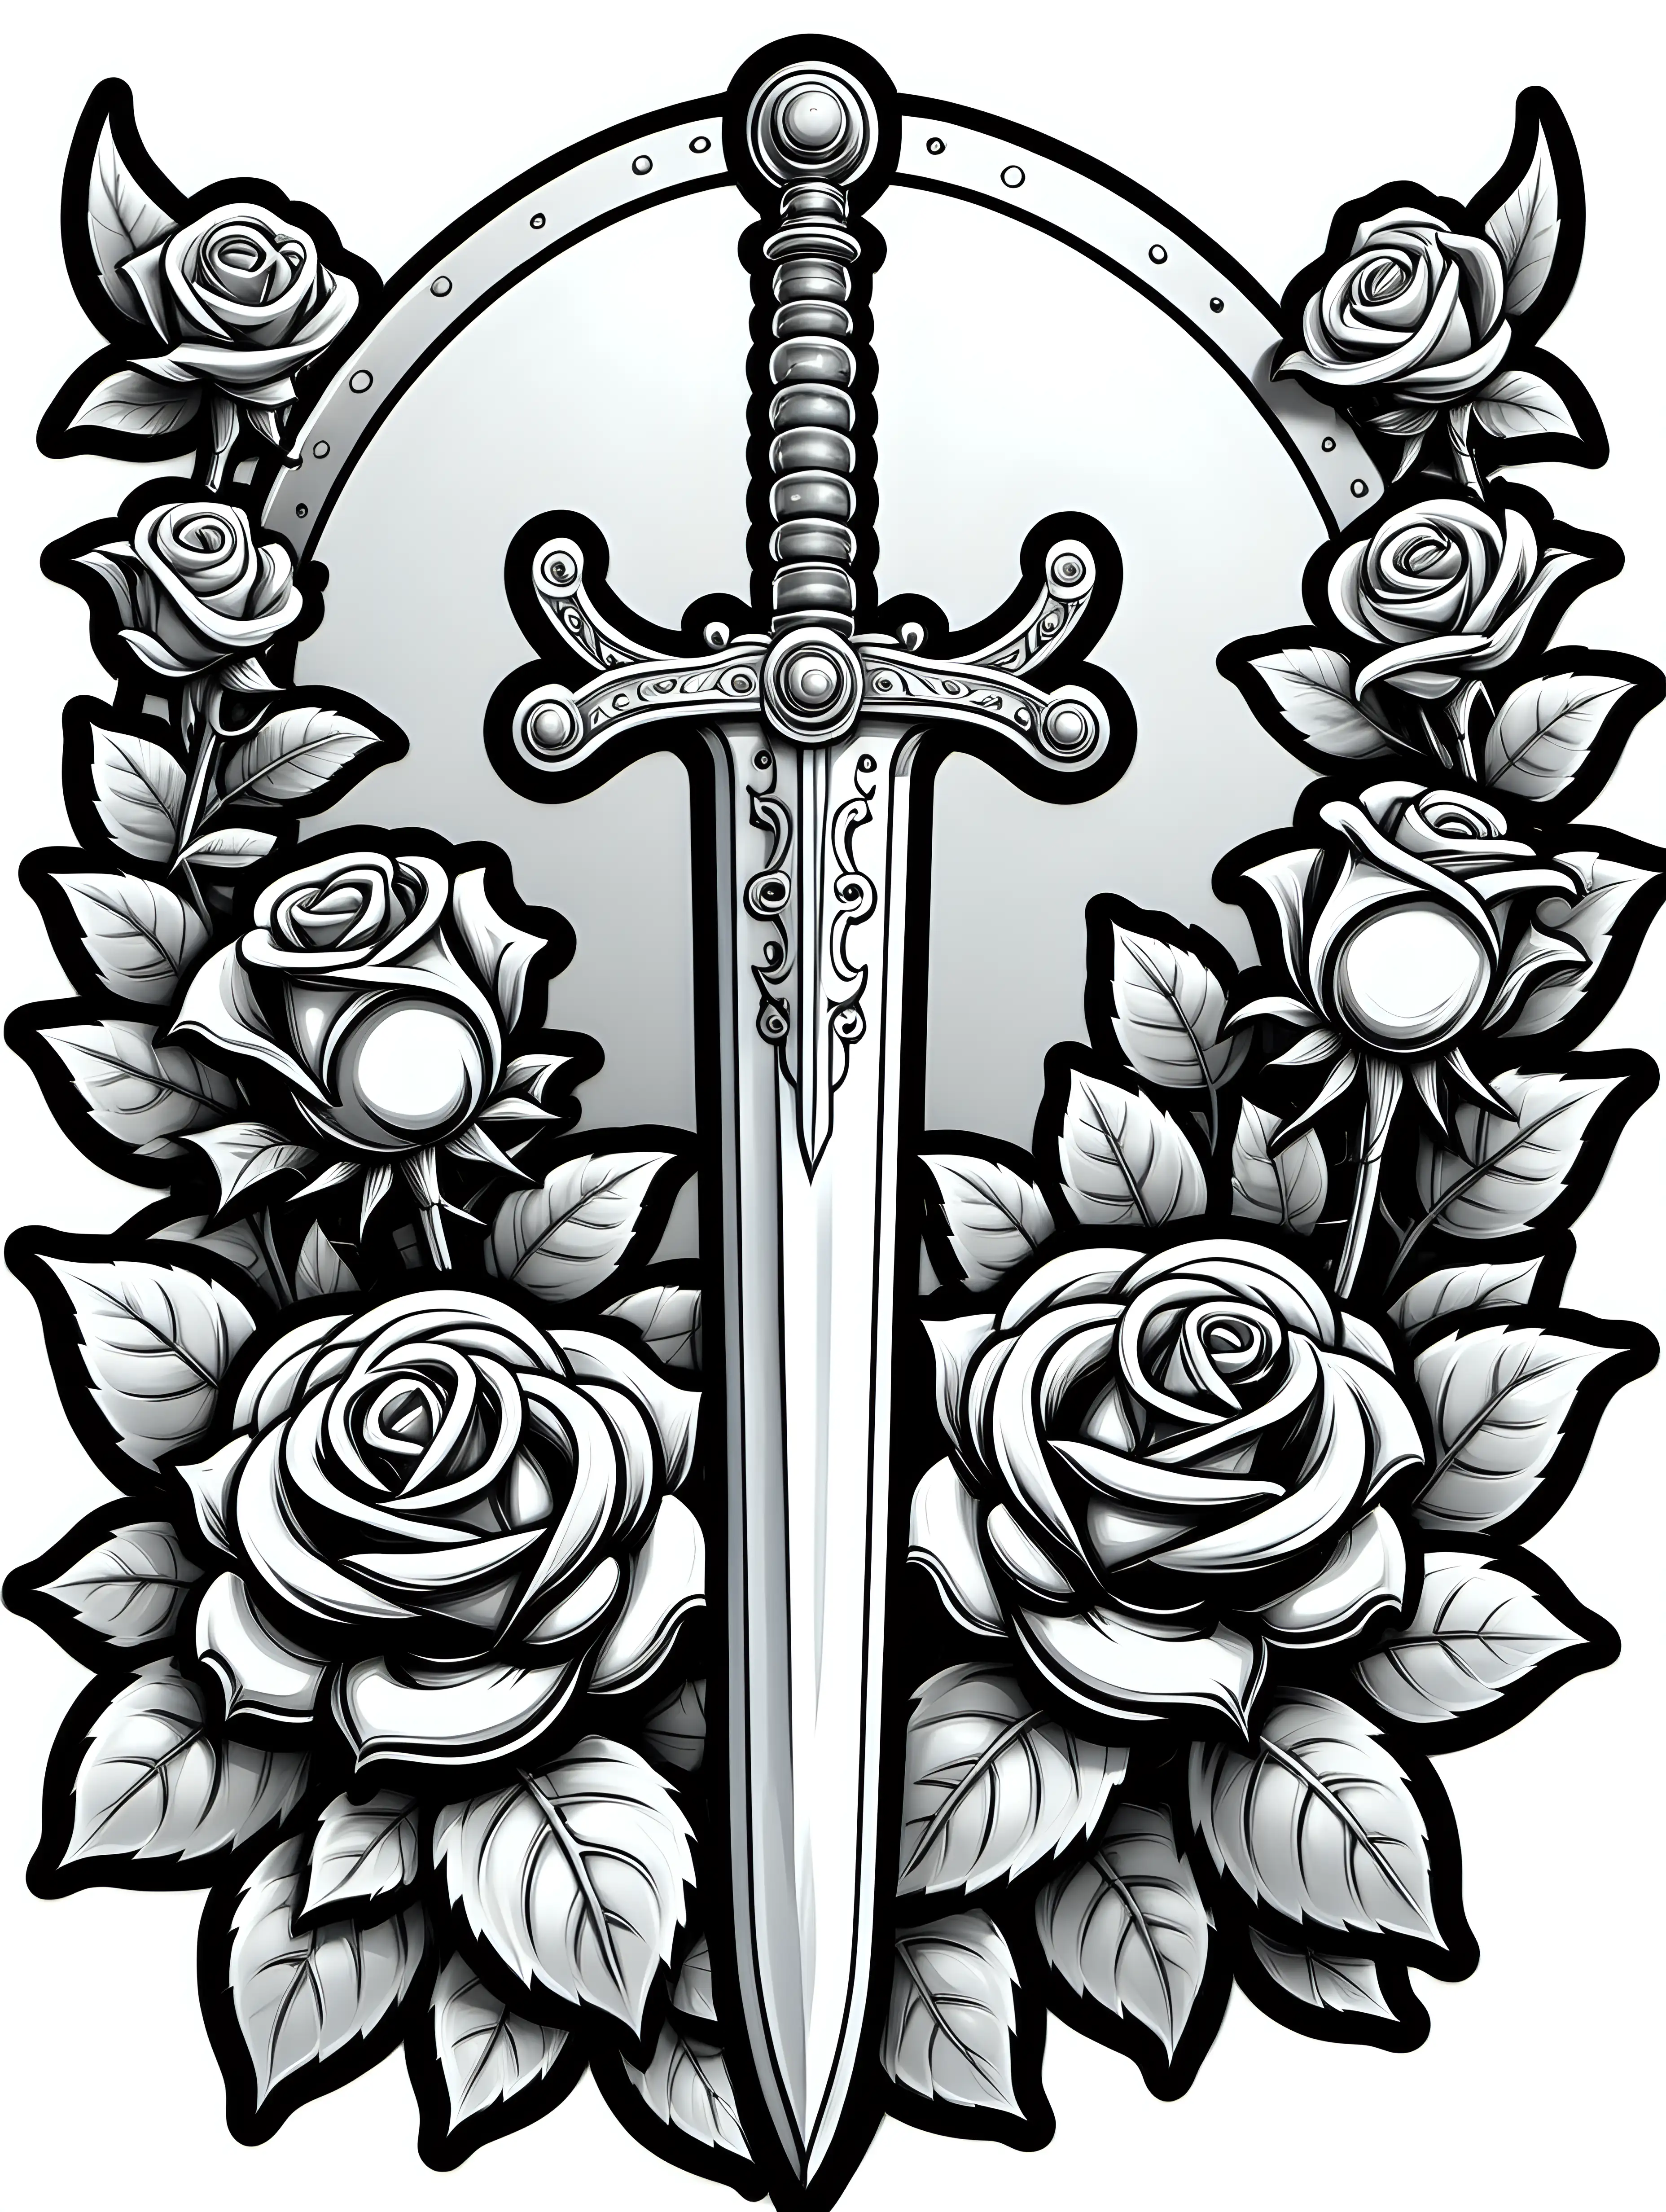 cartoon, sword with roses, sticker, black and white coloring book image